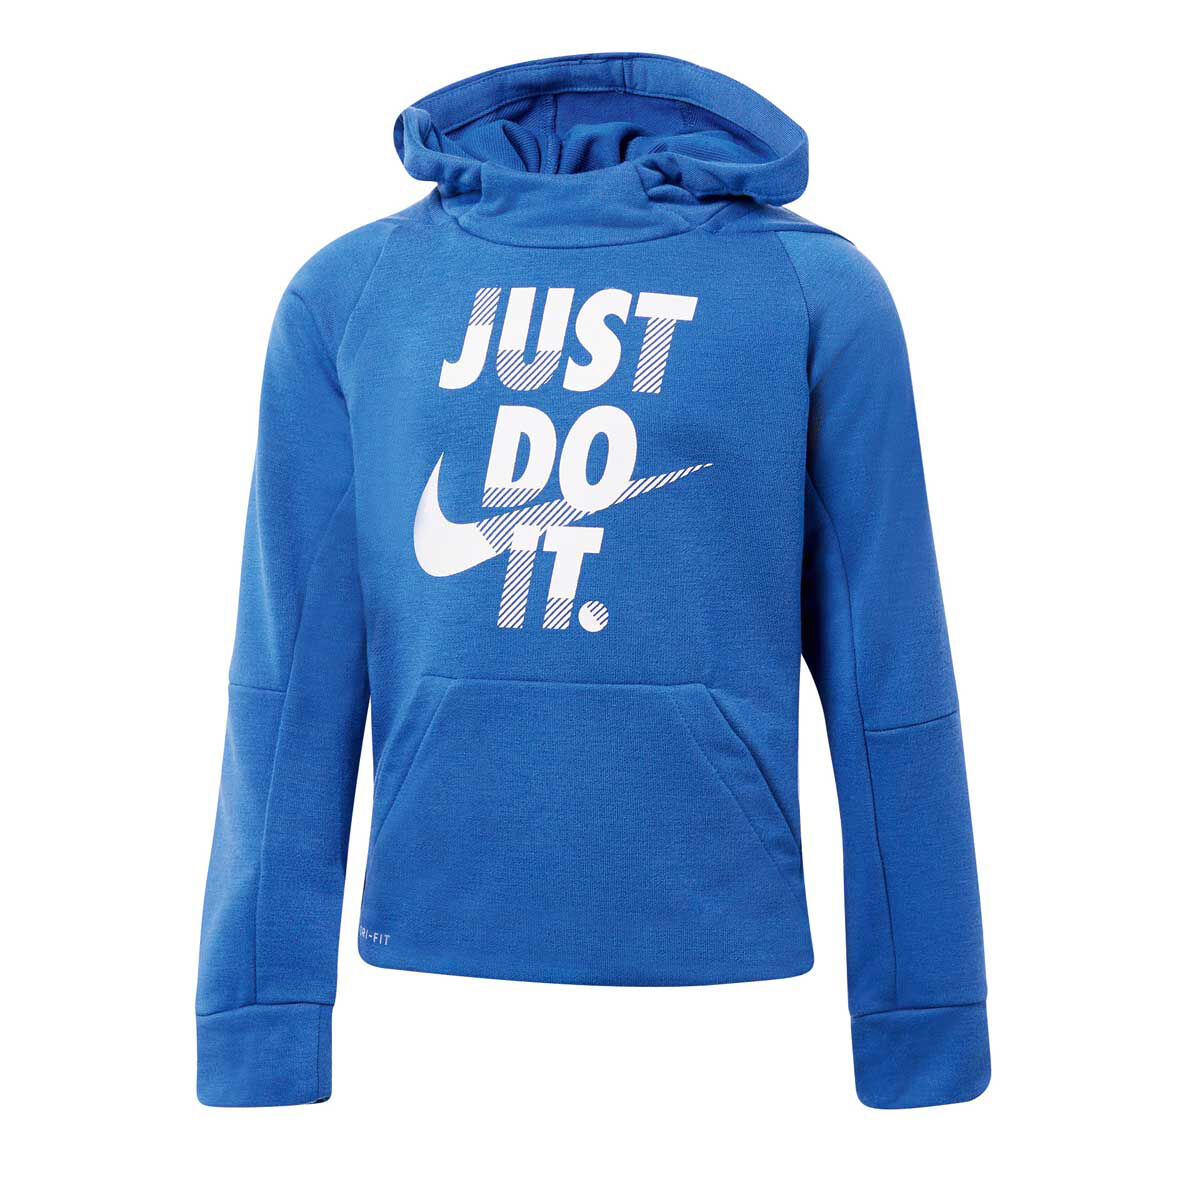 nike pullover blue